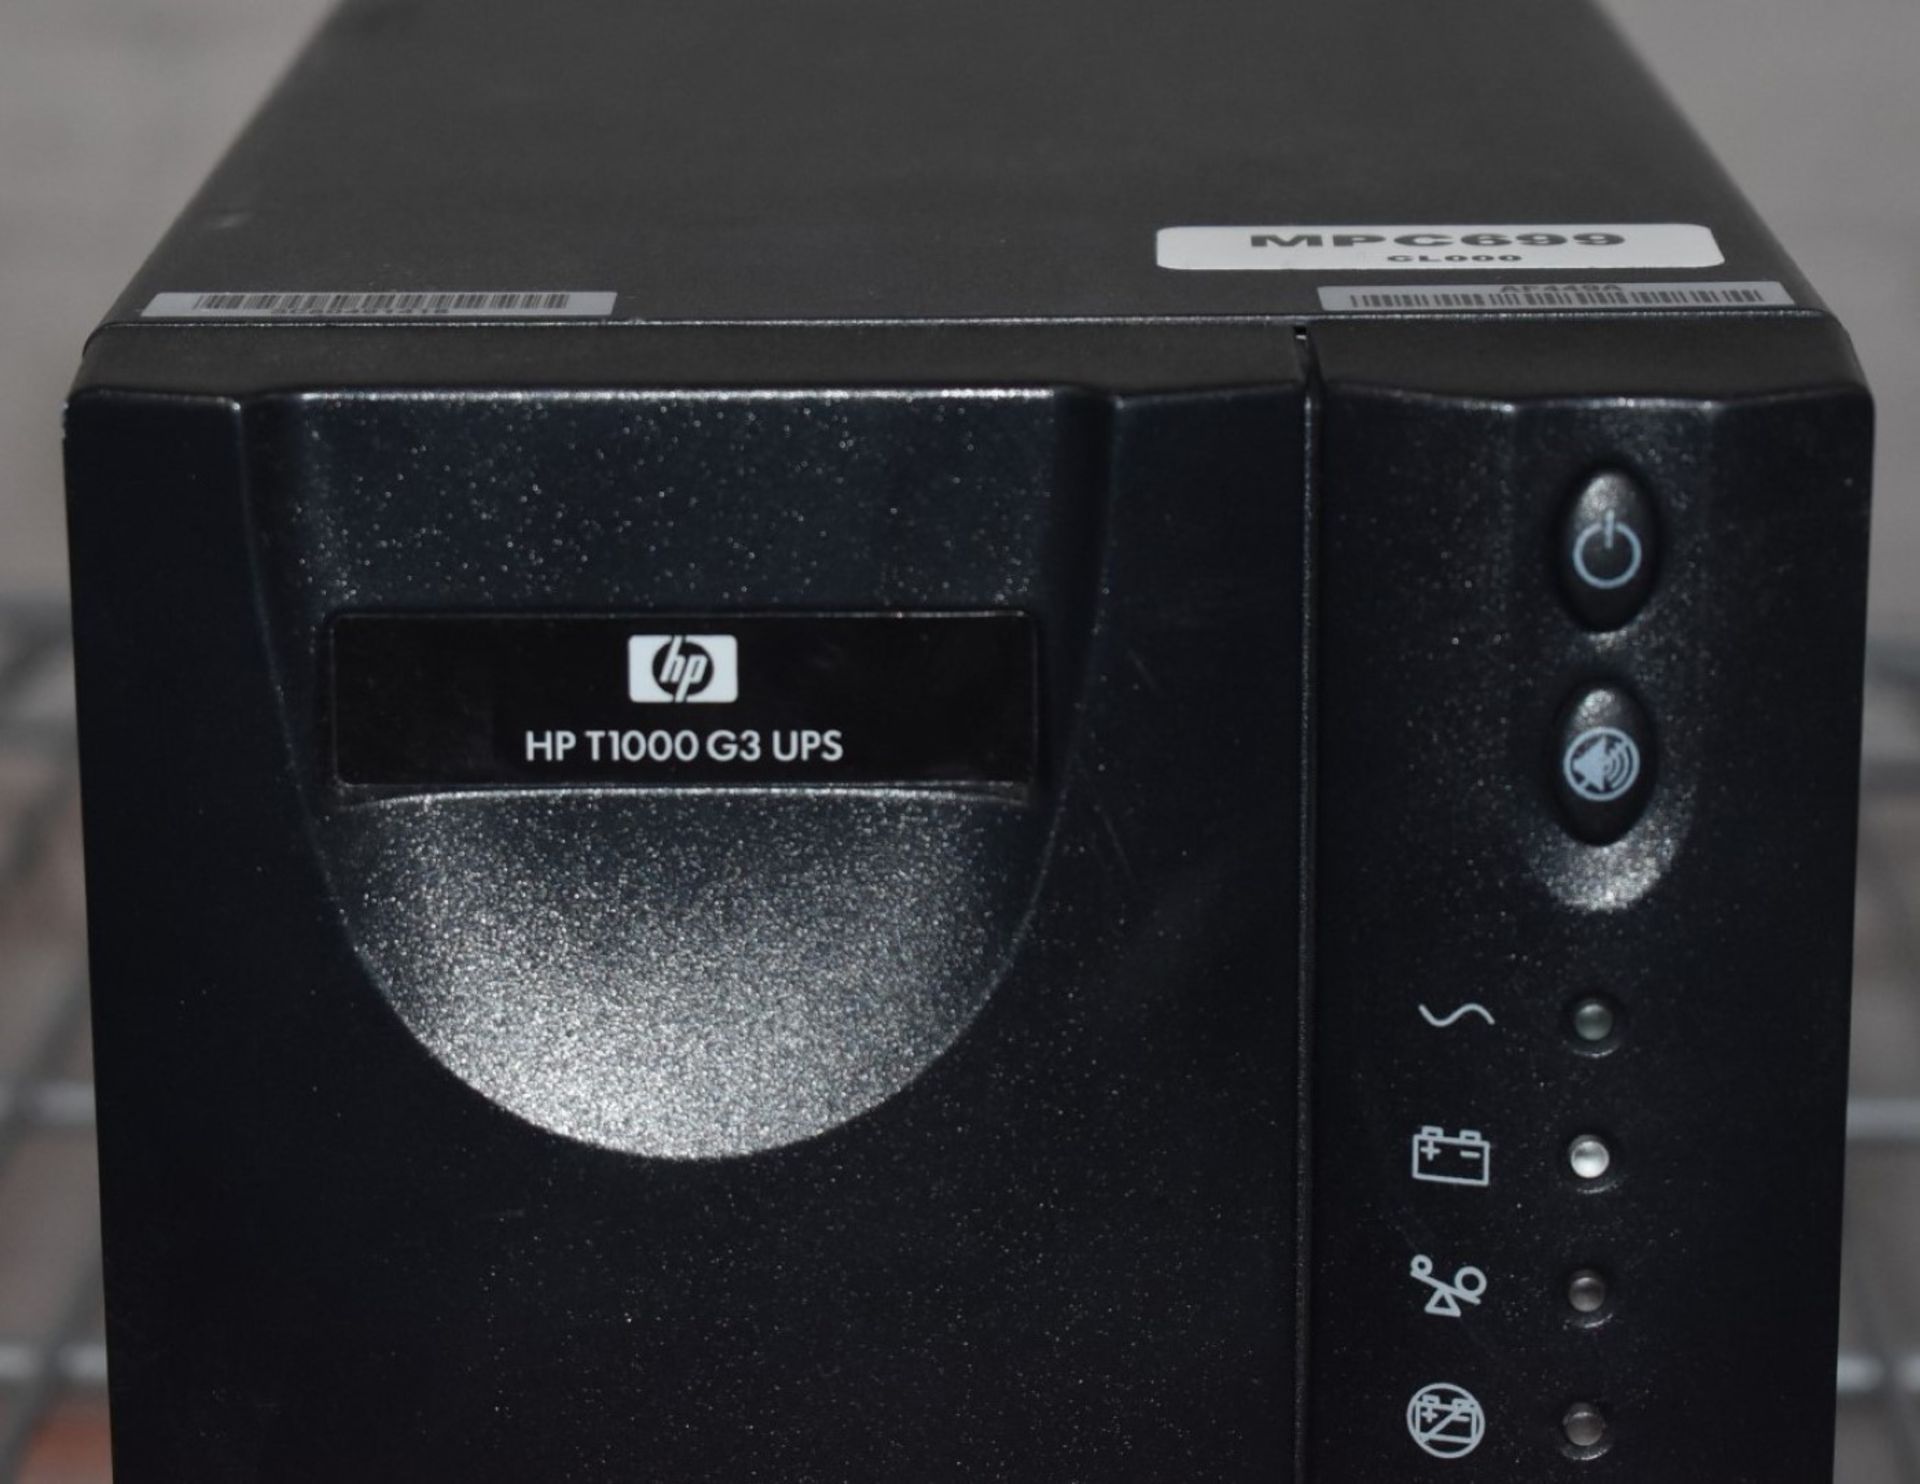 1 x HP T1000 G3 UPS Uninterruptable Power Supply - RRP £249.99 - Ref: MPC699 WH3 - CL011 - Location: - Image 3 of 9